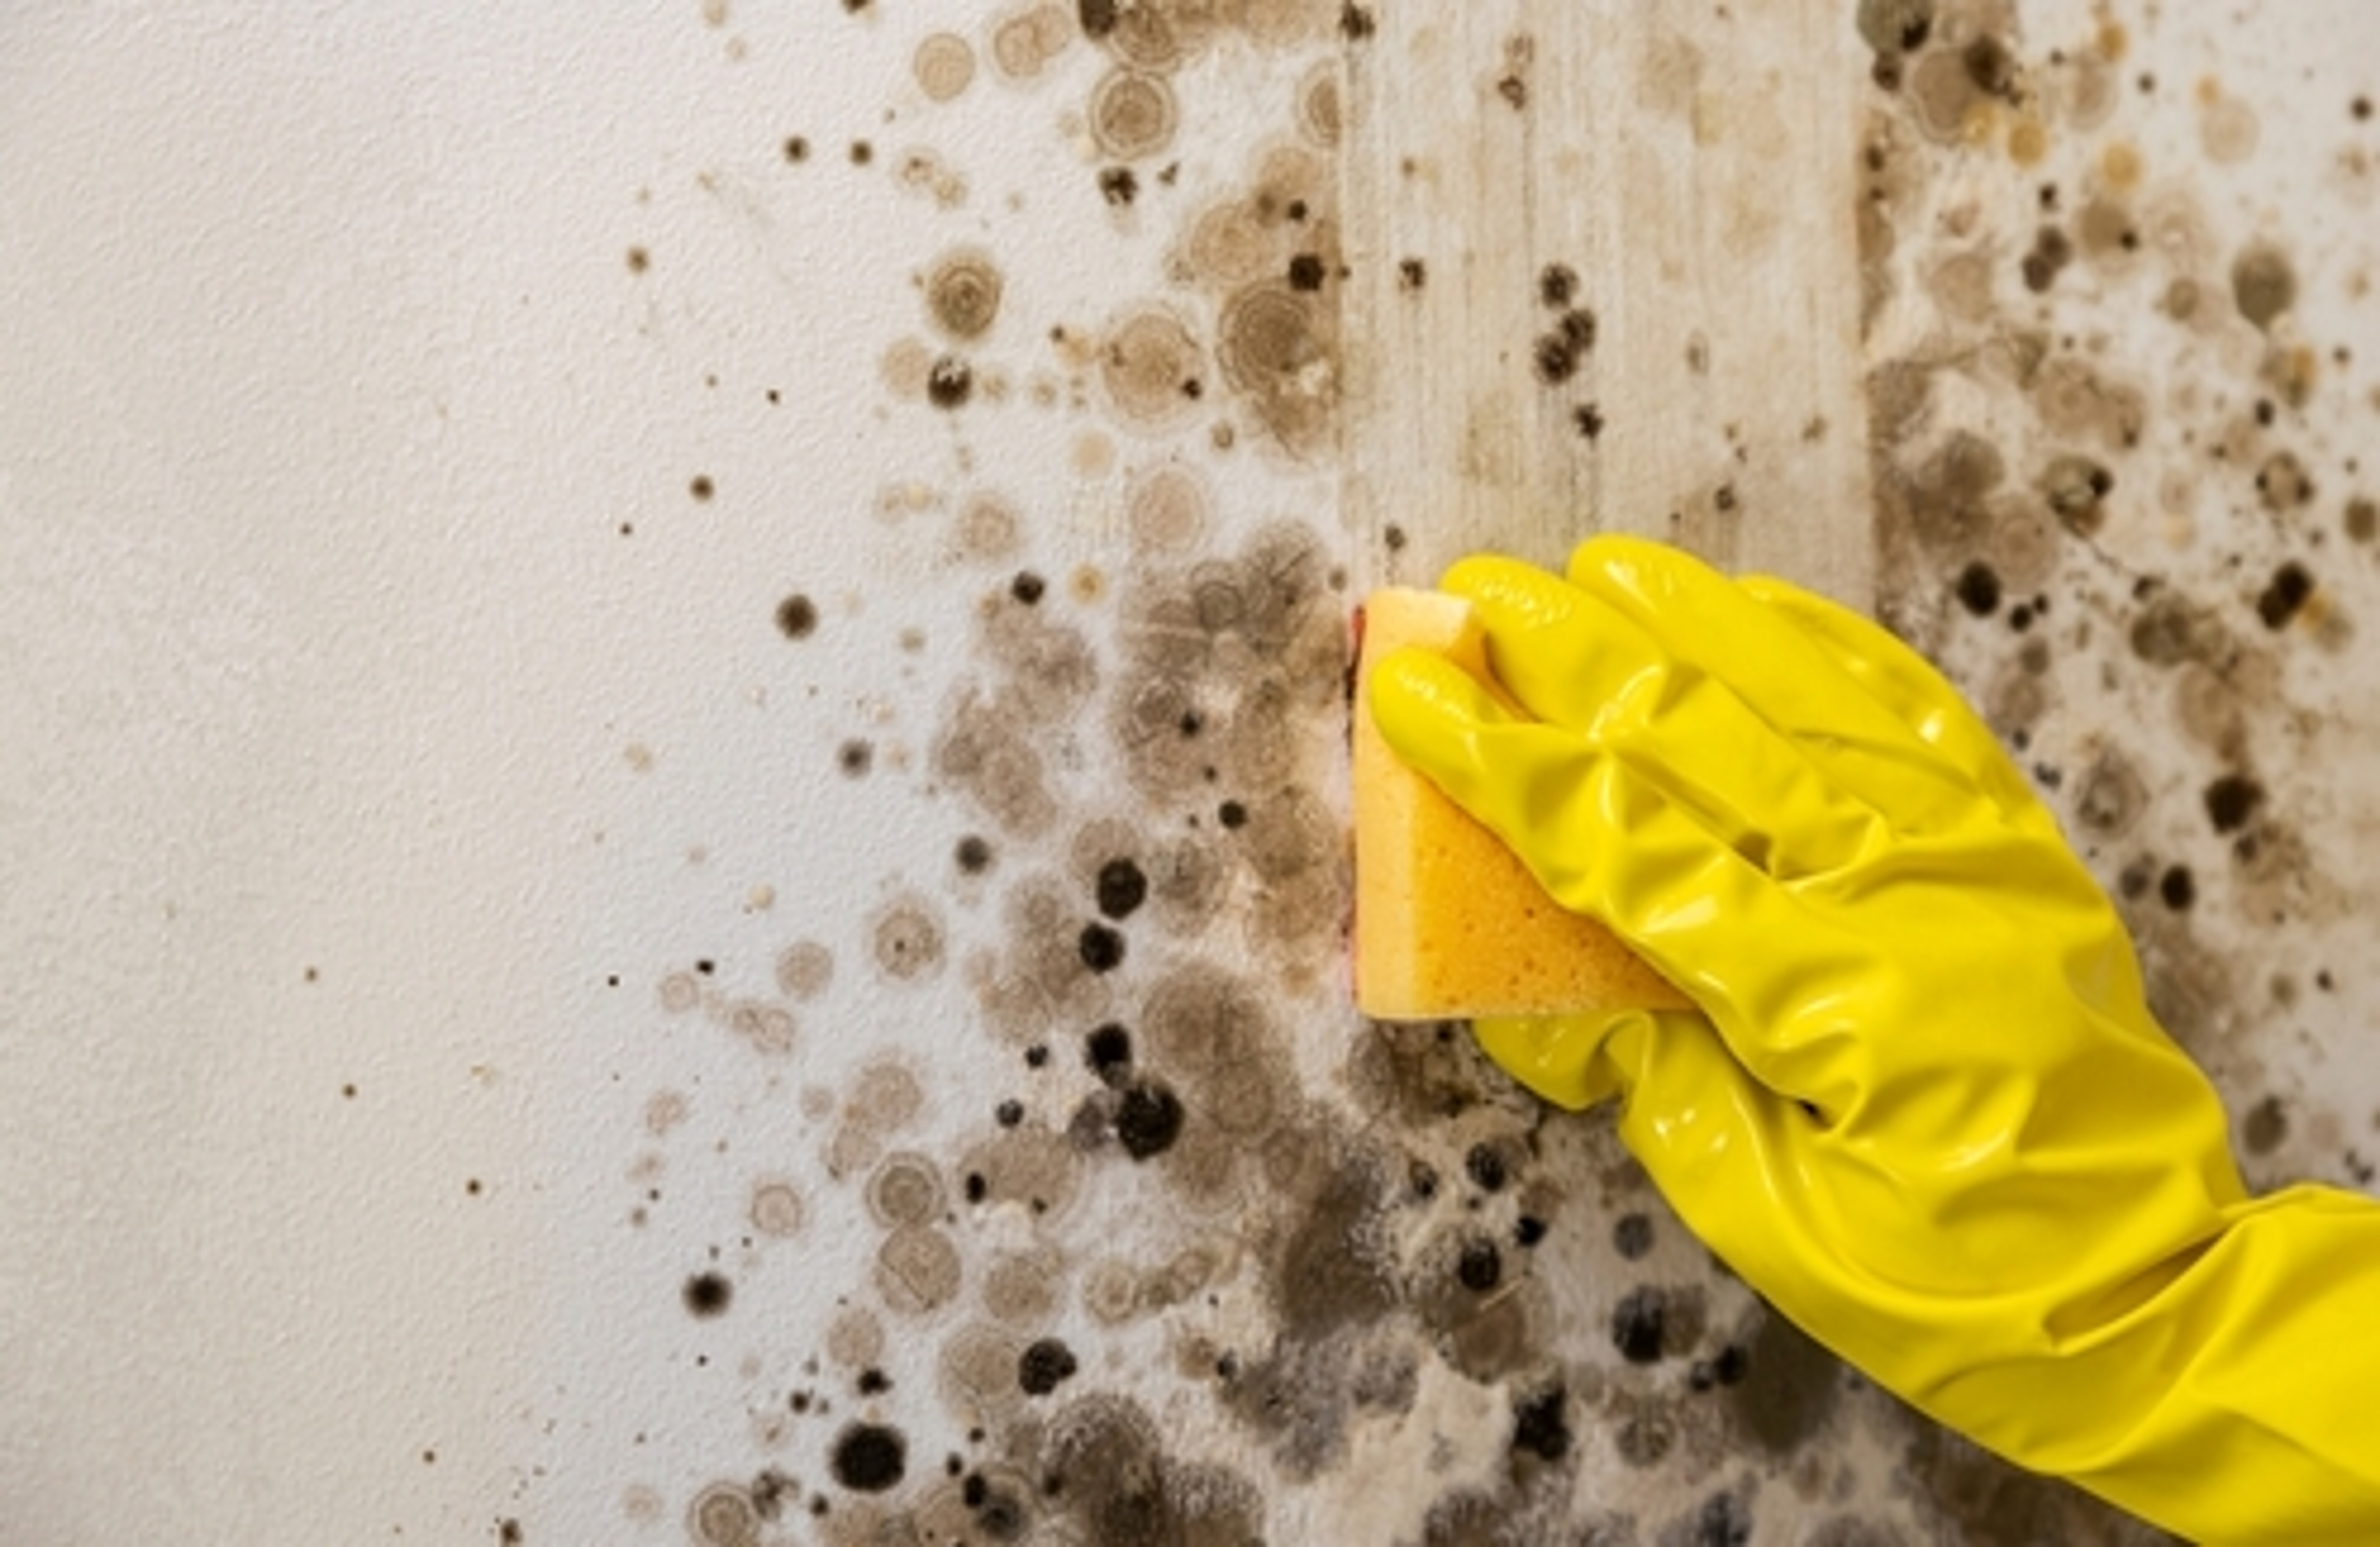 If you have mold in your home or business, you may need mold